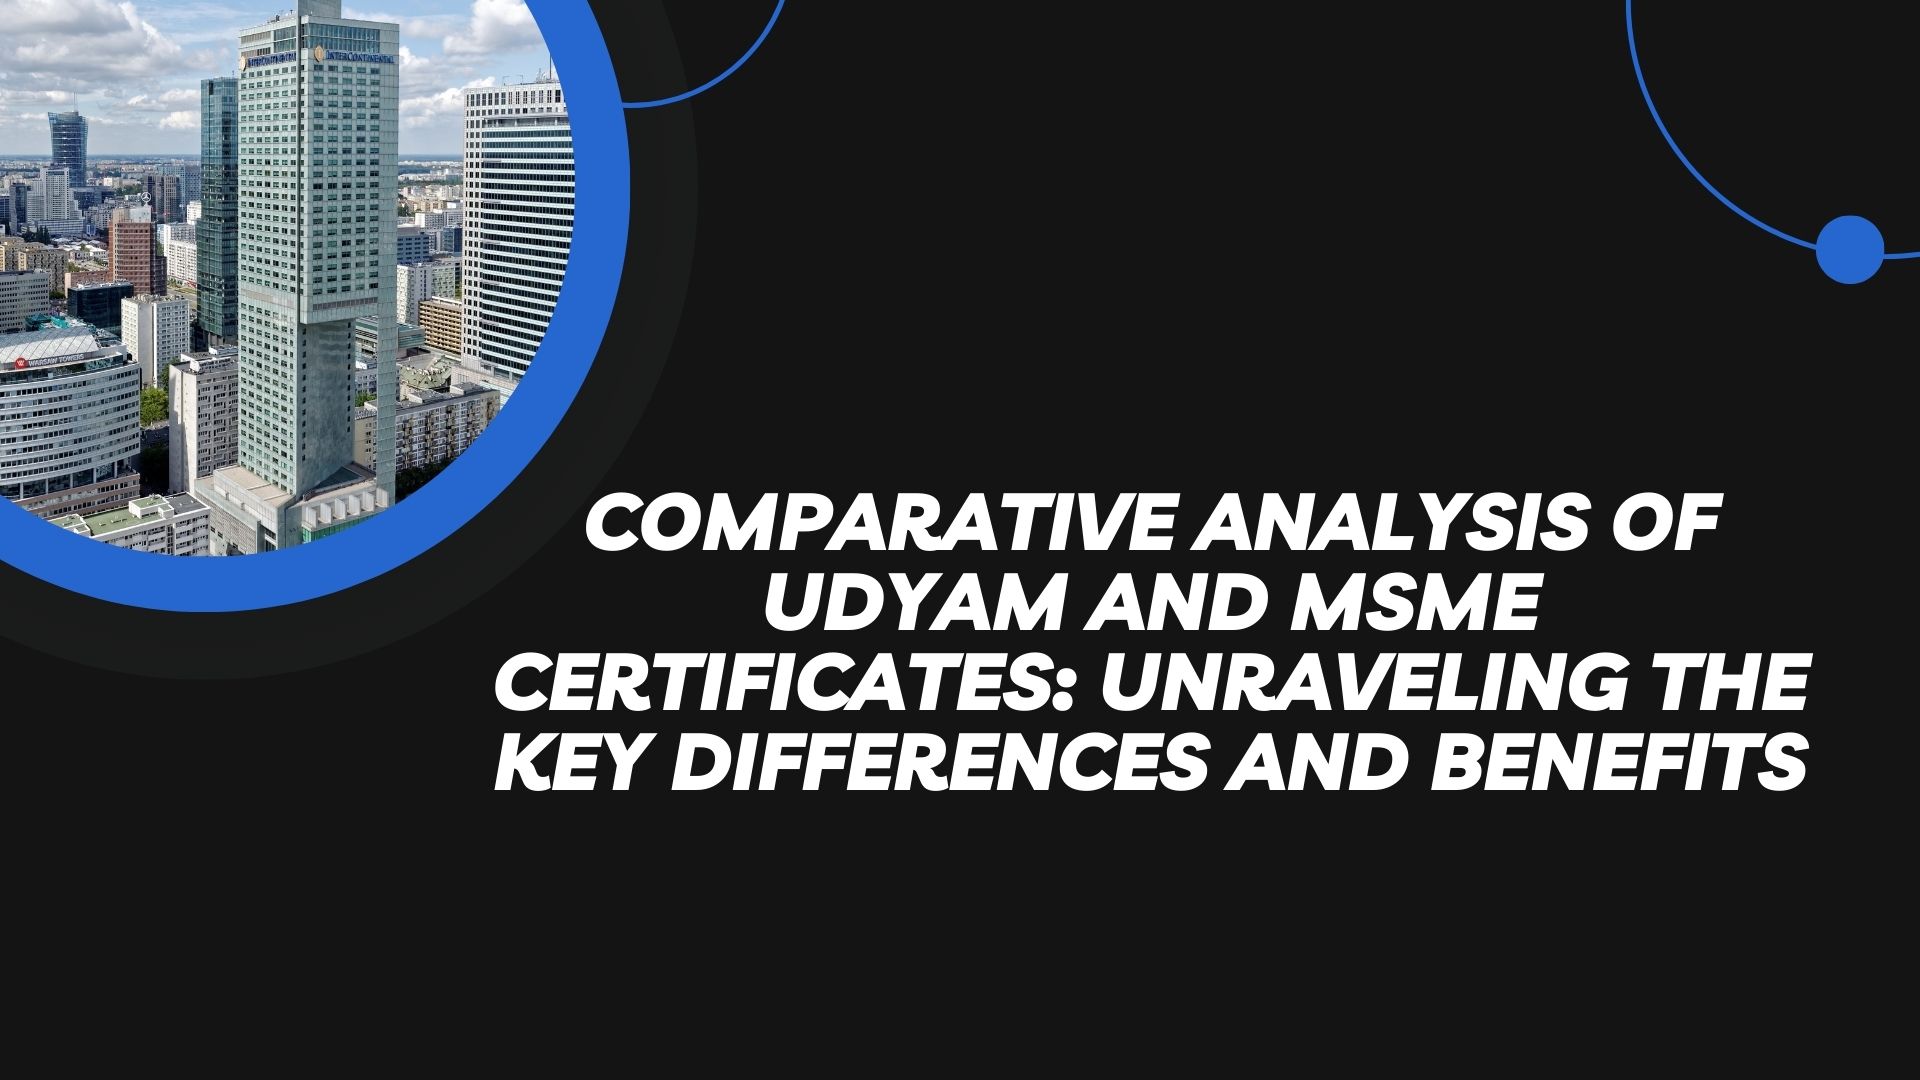 Comparative Analysis of Udyam and MSME Certificates: Unraveling the Key Differences and Benefits